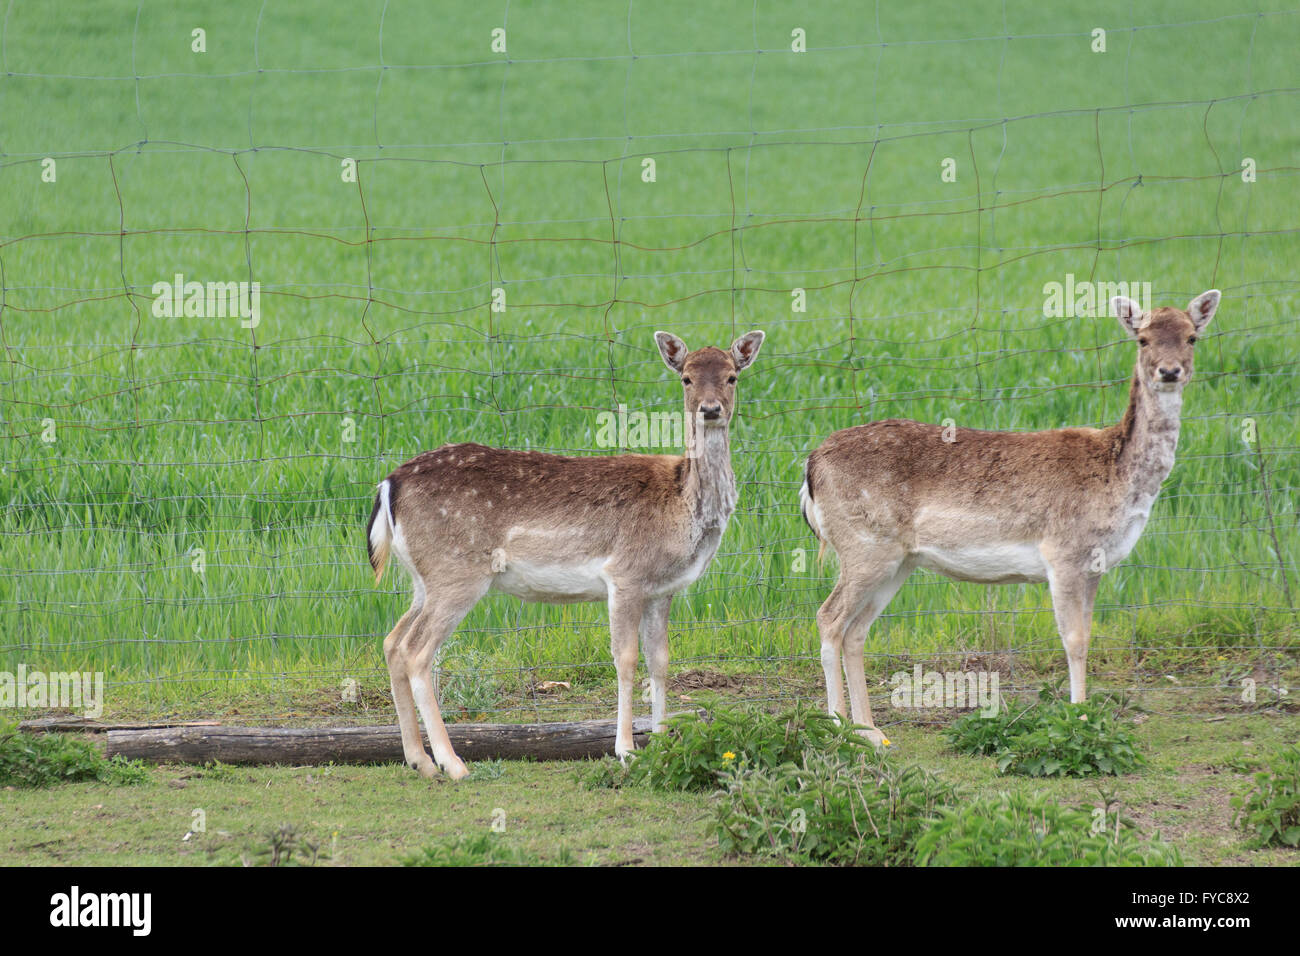 two deers / sika wild / does looking curious Stock Photo